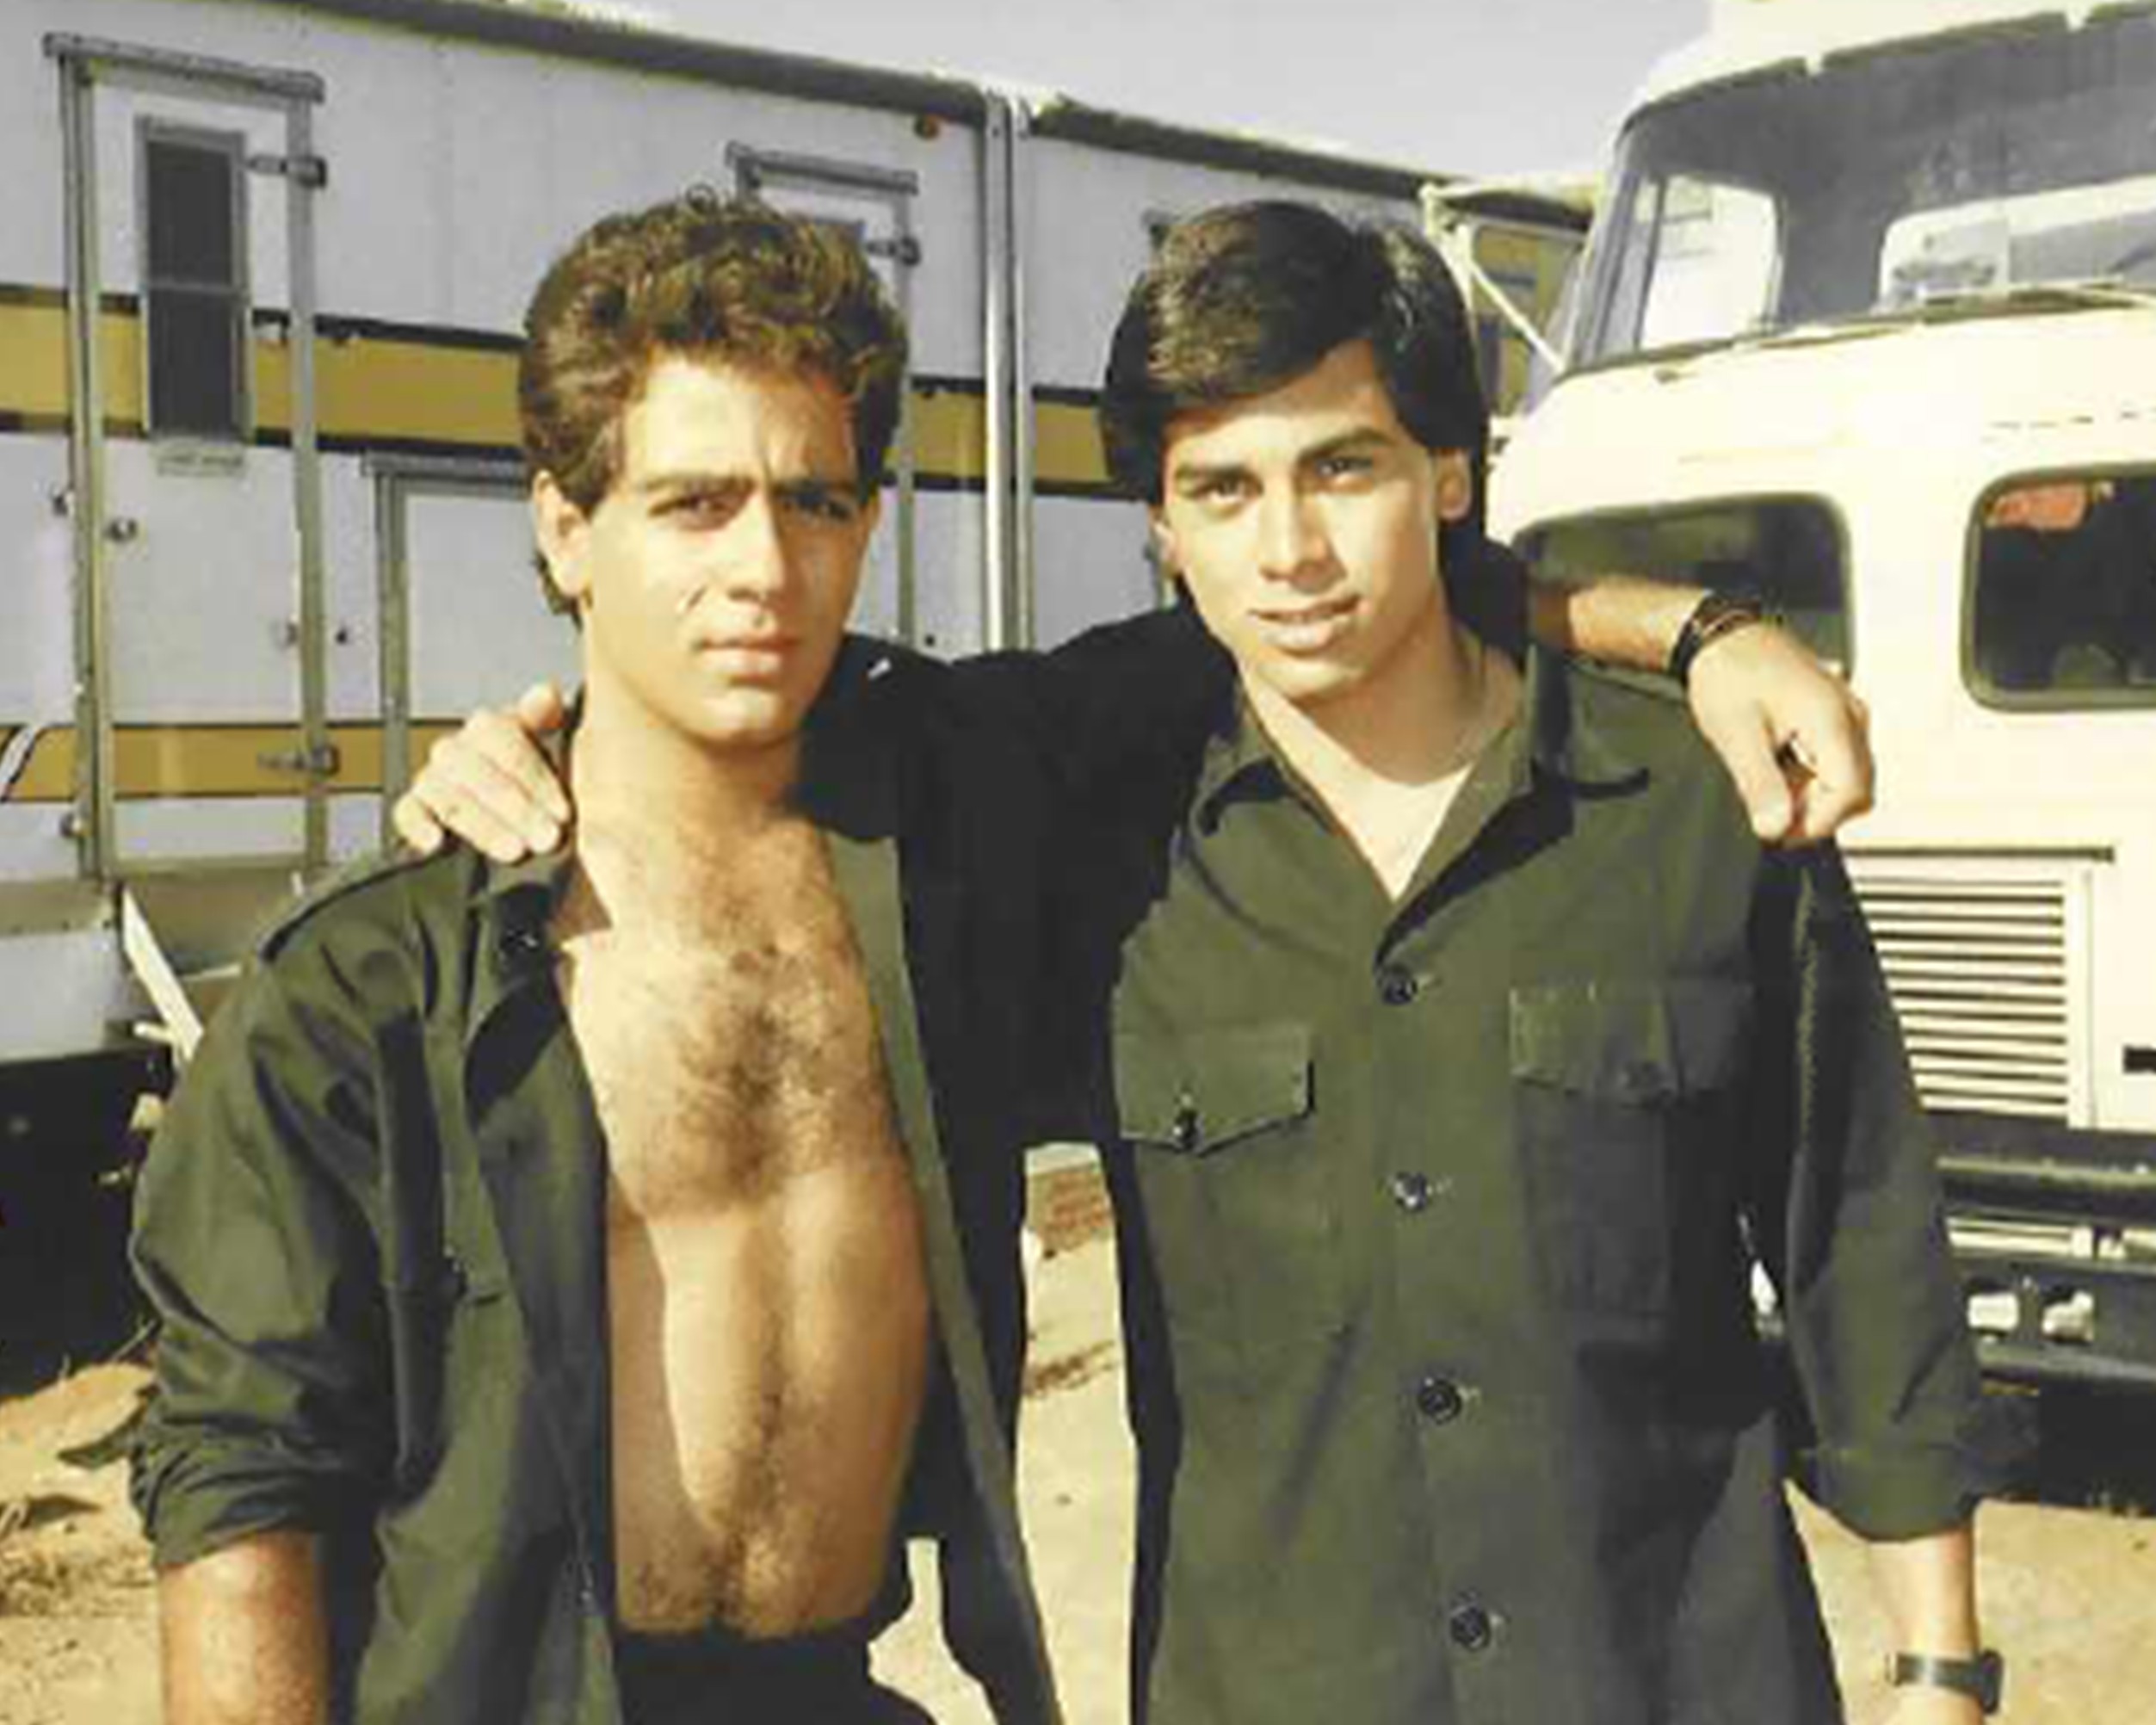 Robert Hallak and John Prudhont during filming of their Guest-Star Roles in the 3rd Episode, 